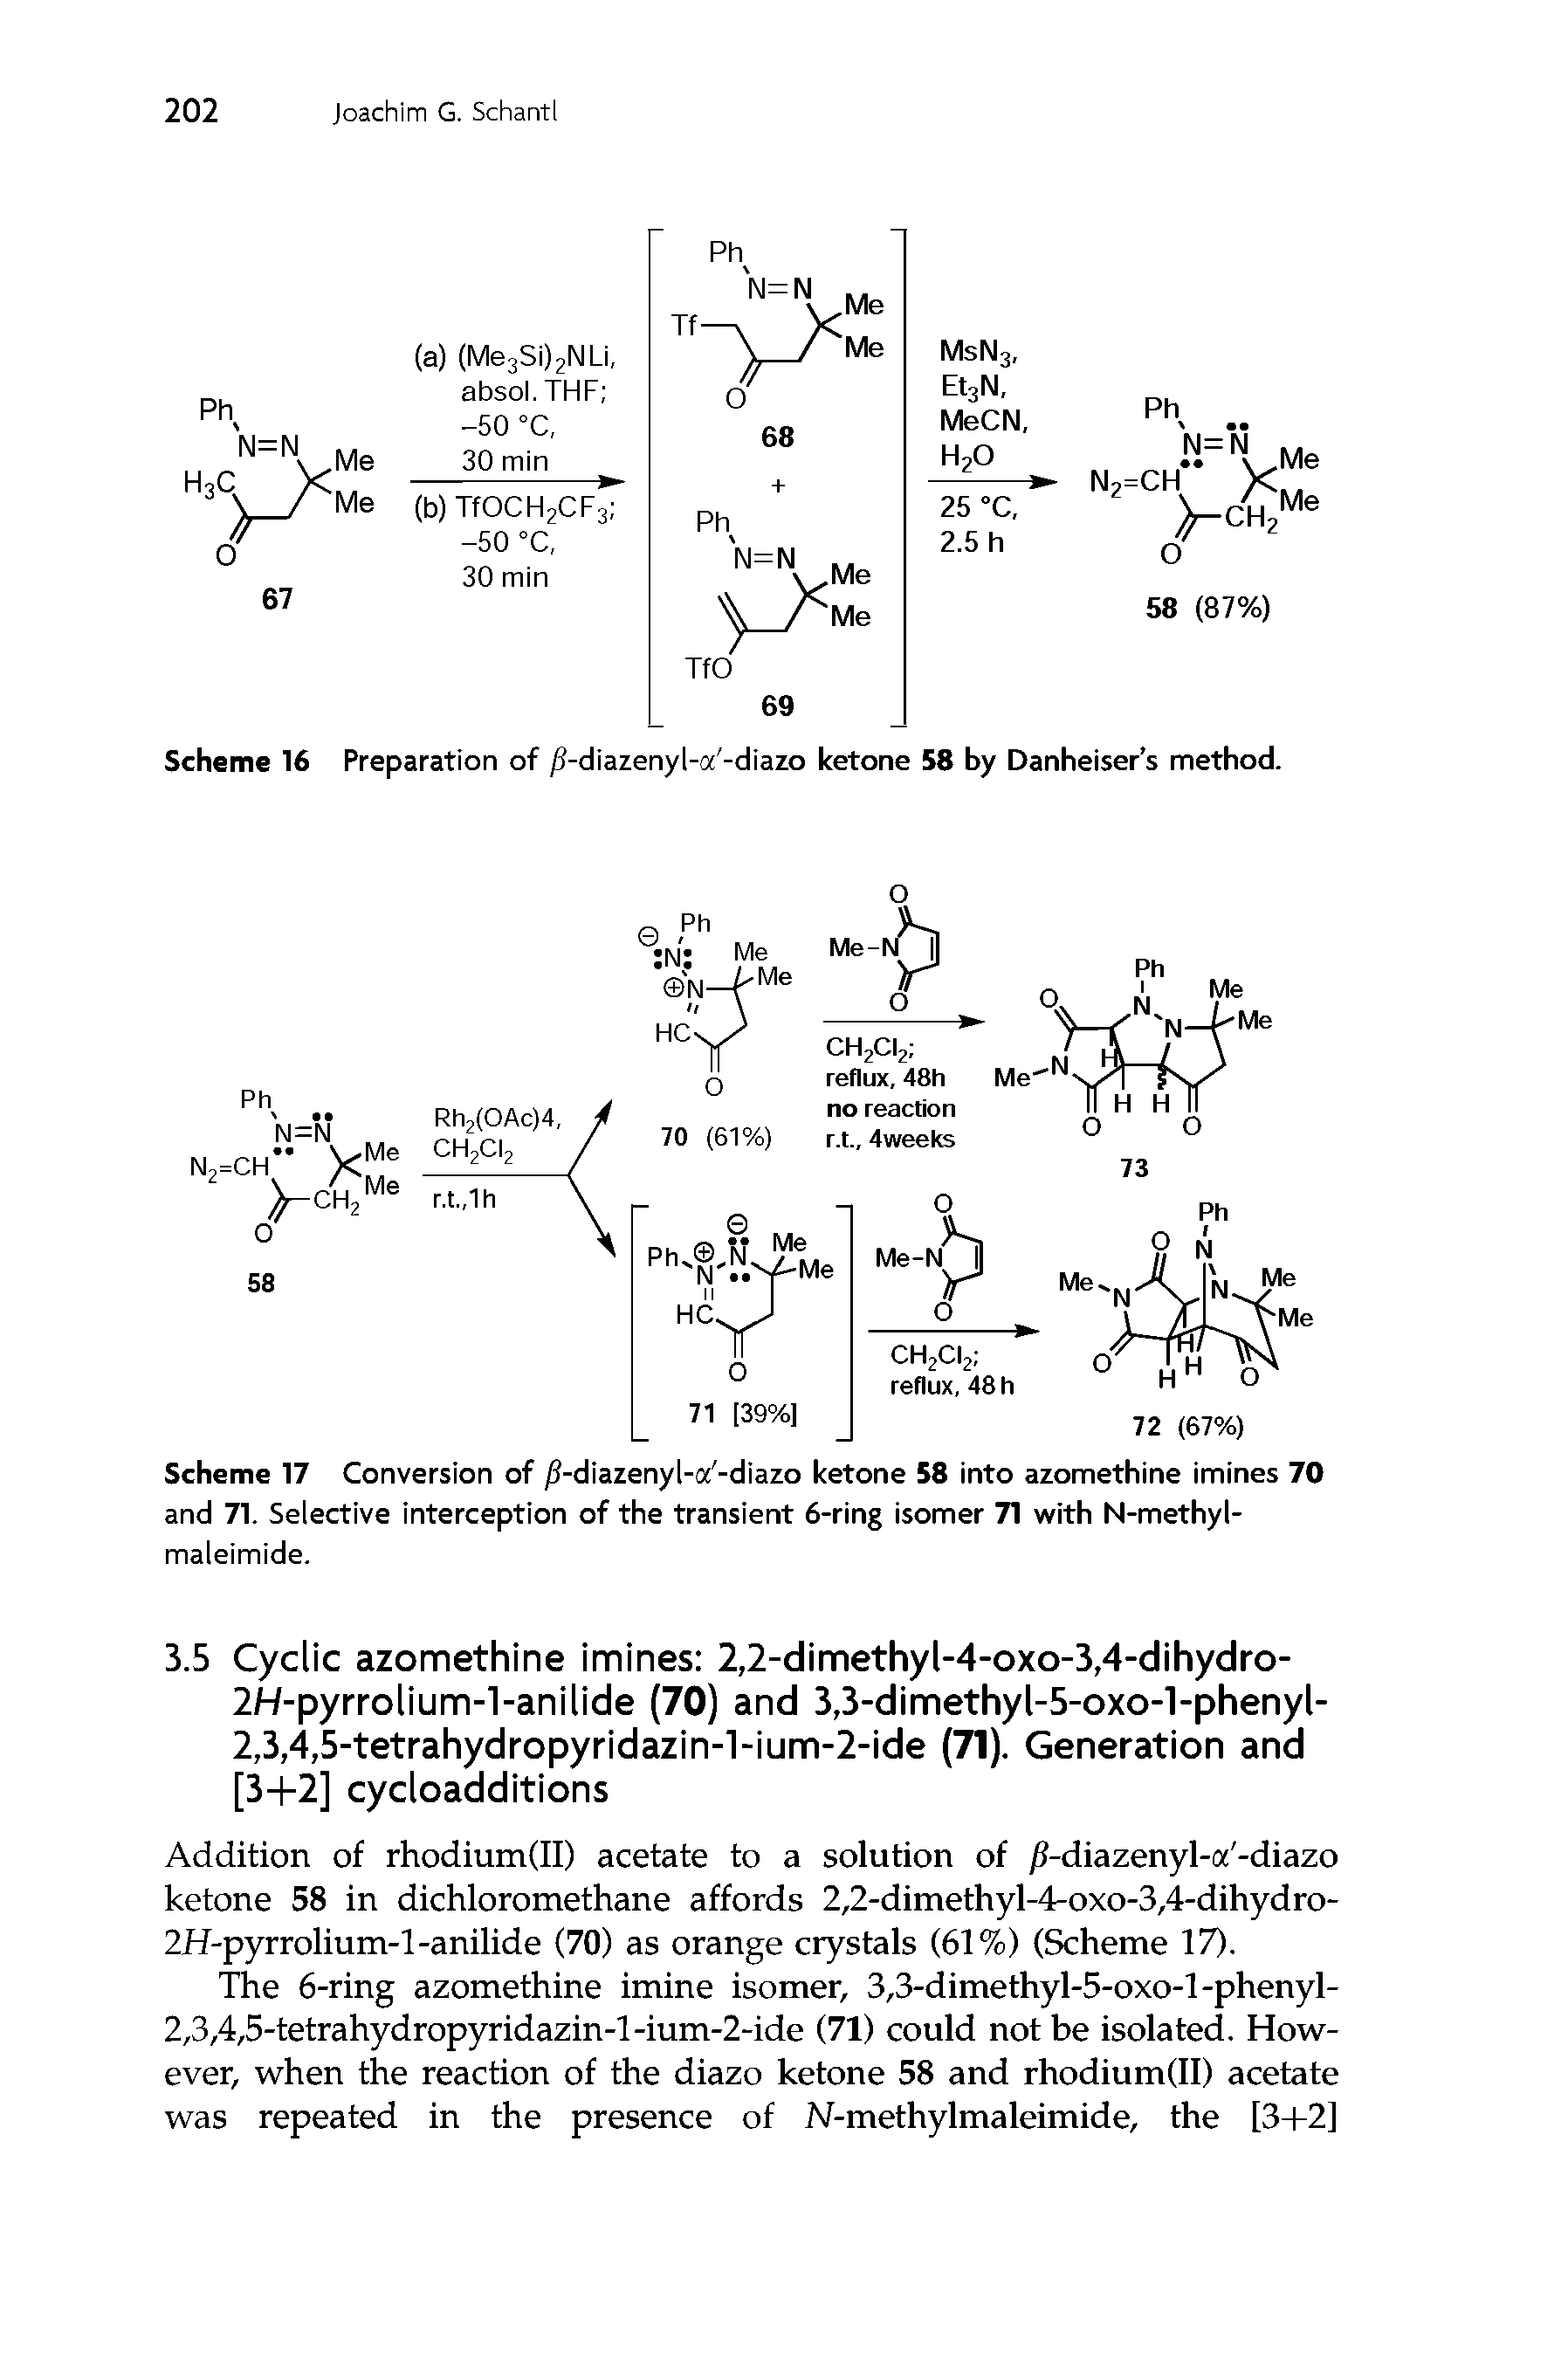 Scheme 17 Conversion of jS-diazenyl-a -diazo ketone 58 into azomethine imines 70 and 71. Selective interception of the transient 6-ring isomer 71 with N-methyi-...